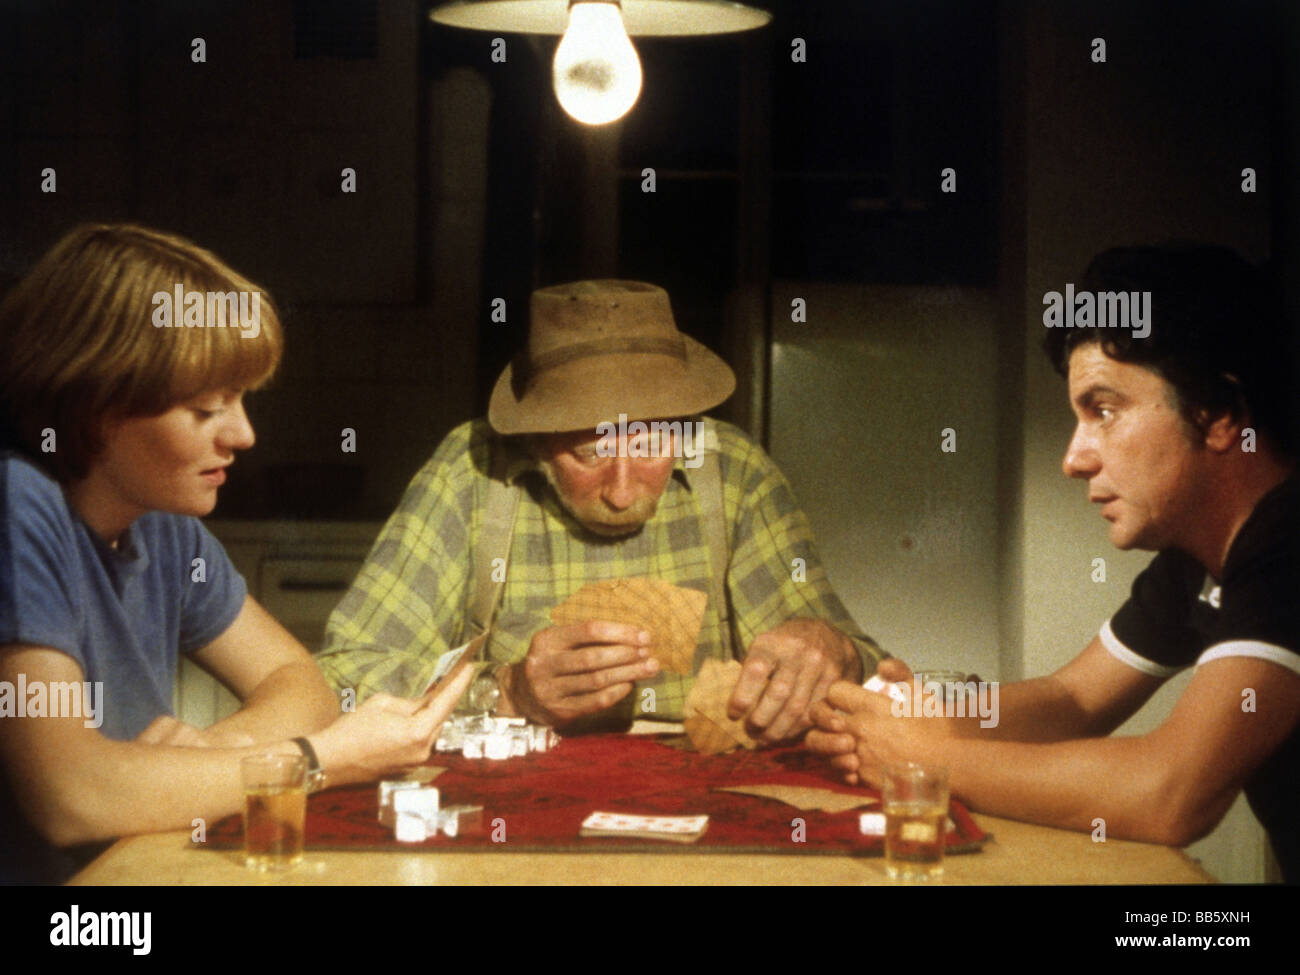 movie, 'Les Petites fugues', FRA/CHE 1979, director: Yves Yersin, scene with: Michel Robin, playing cards, gambling, conversatio Stock Photo